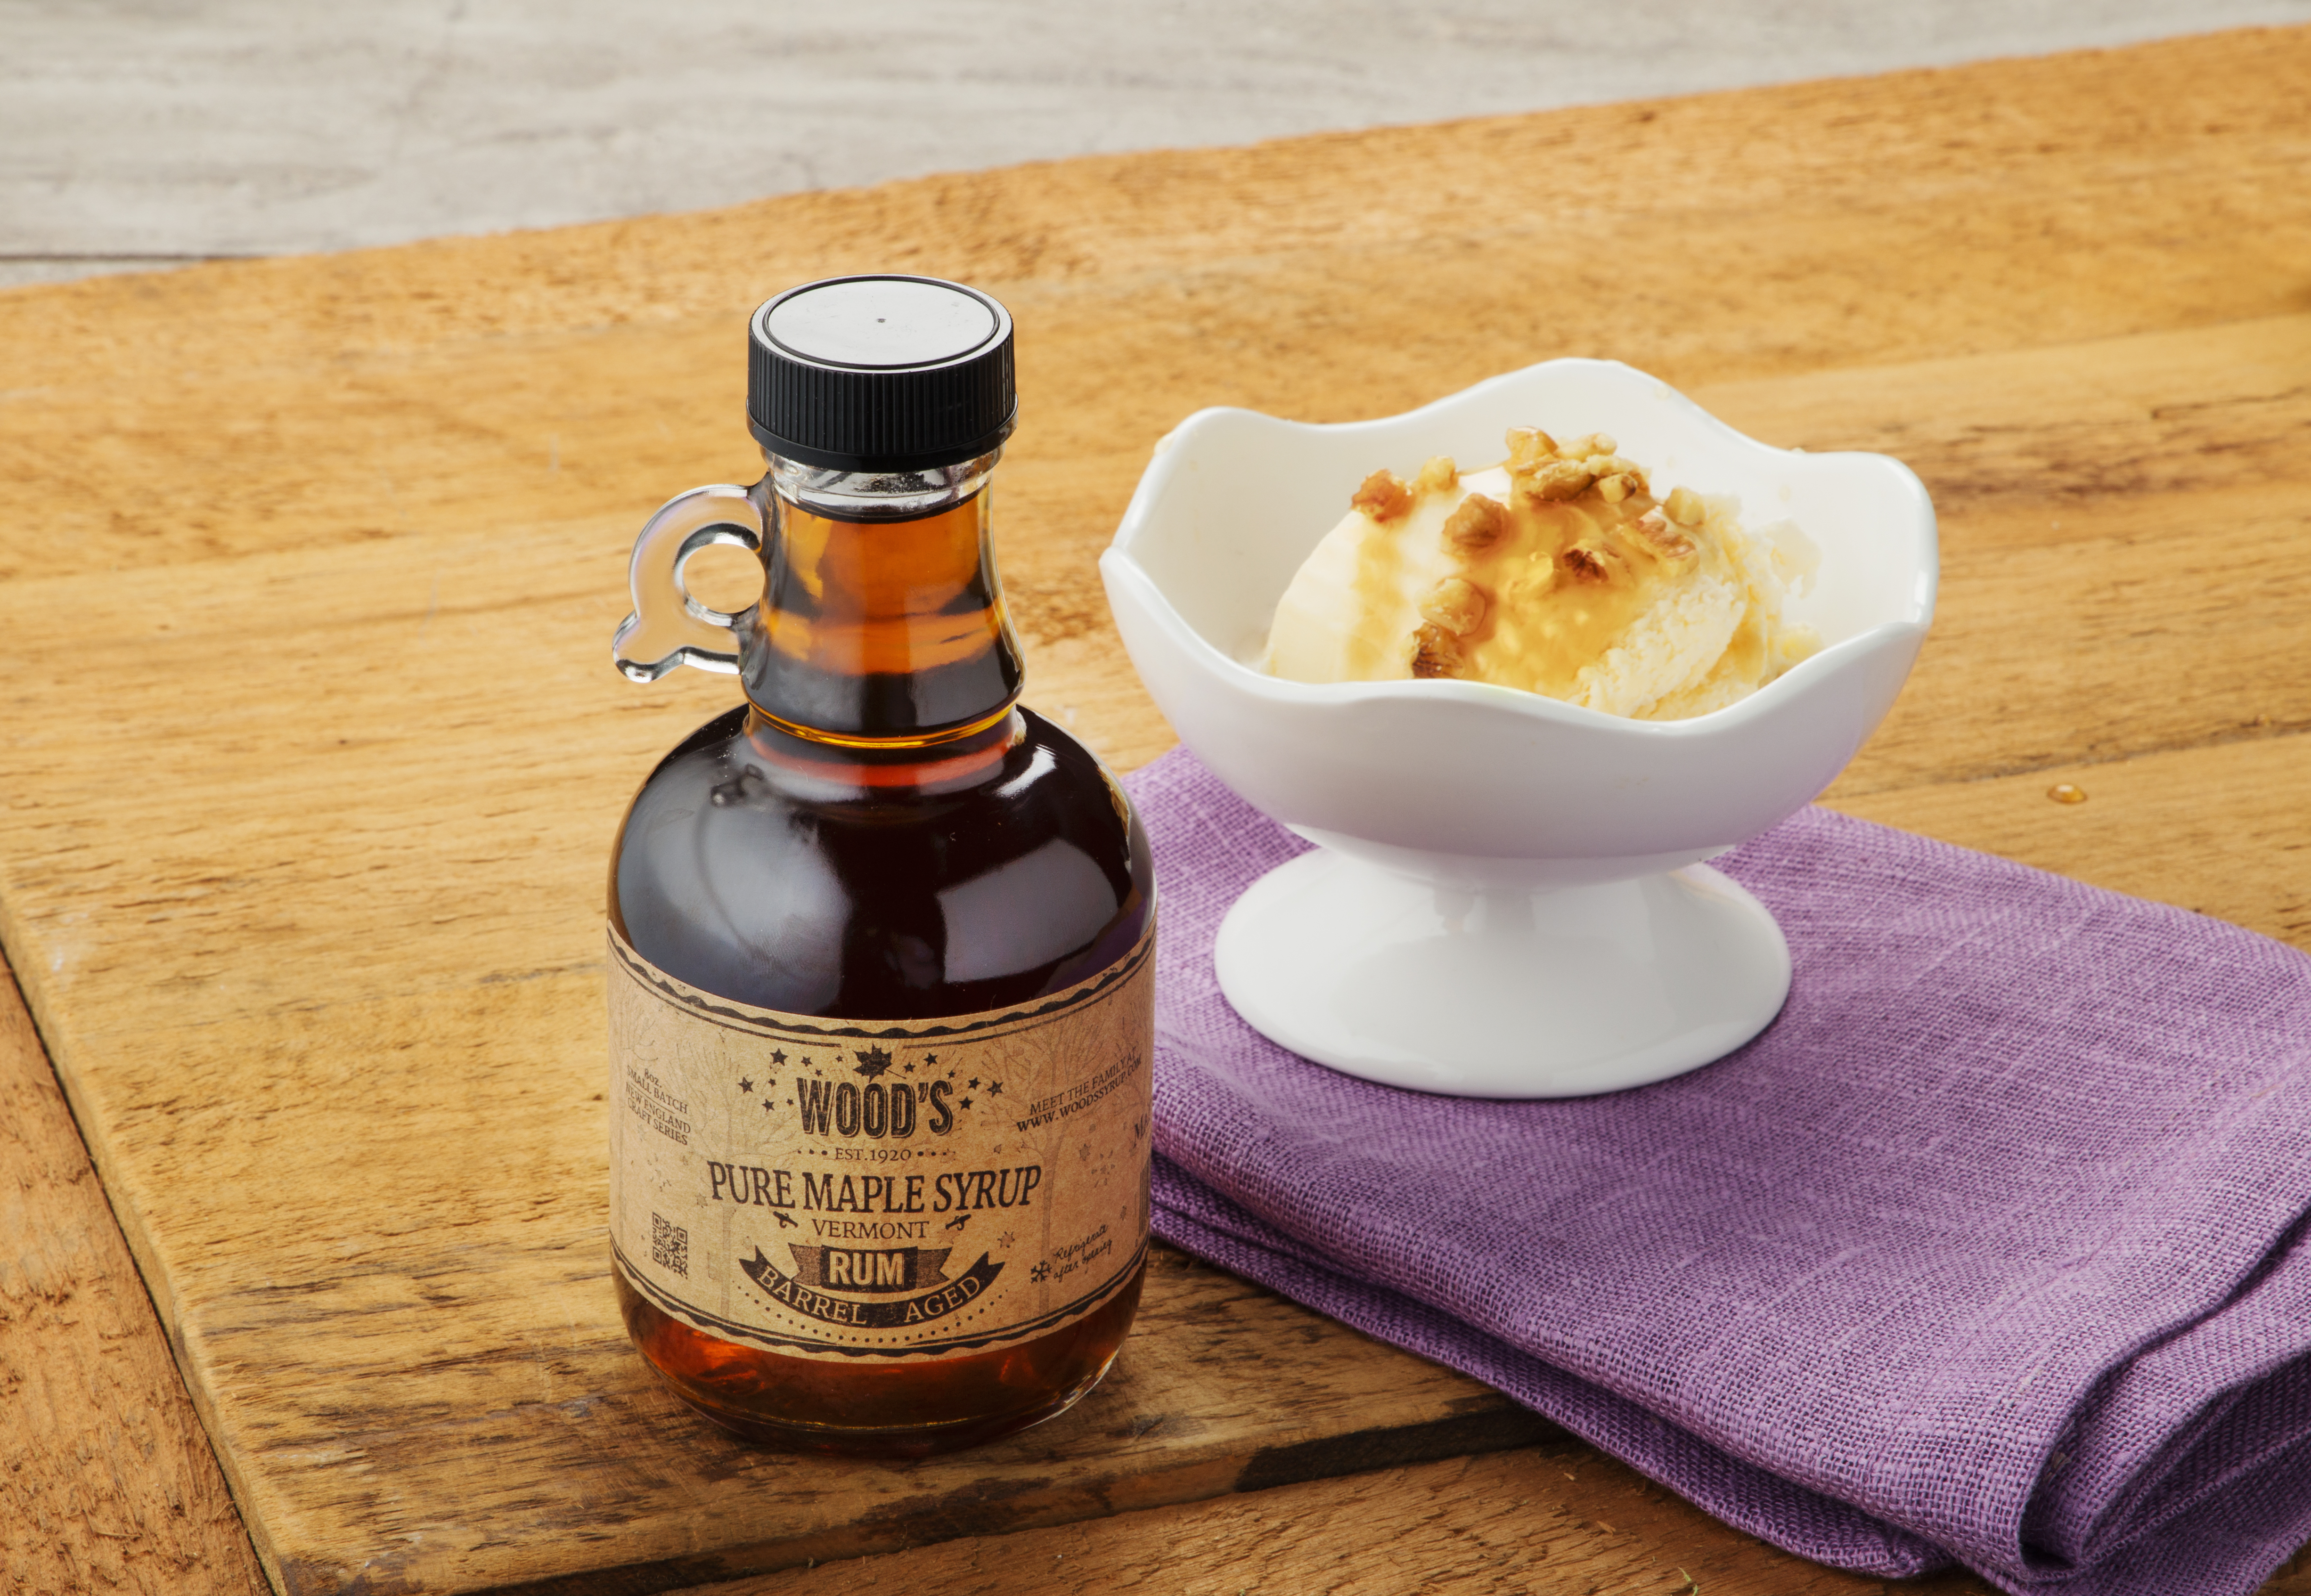 A bottle of Rum-infused Wood's maple syrup sits next to a bowl of ice cream